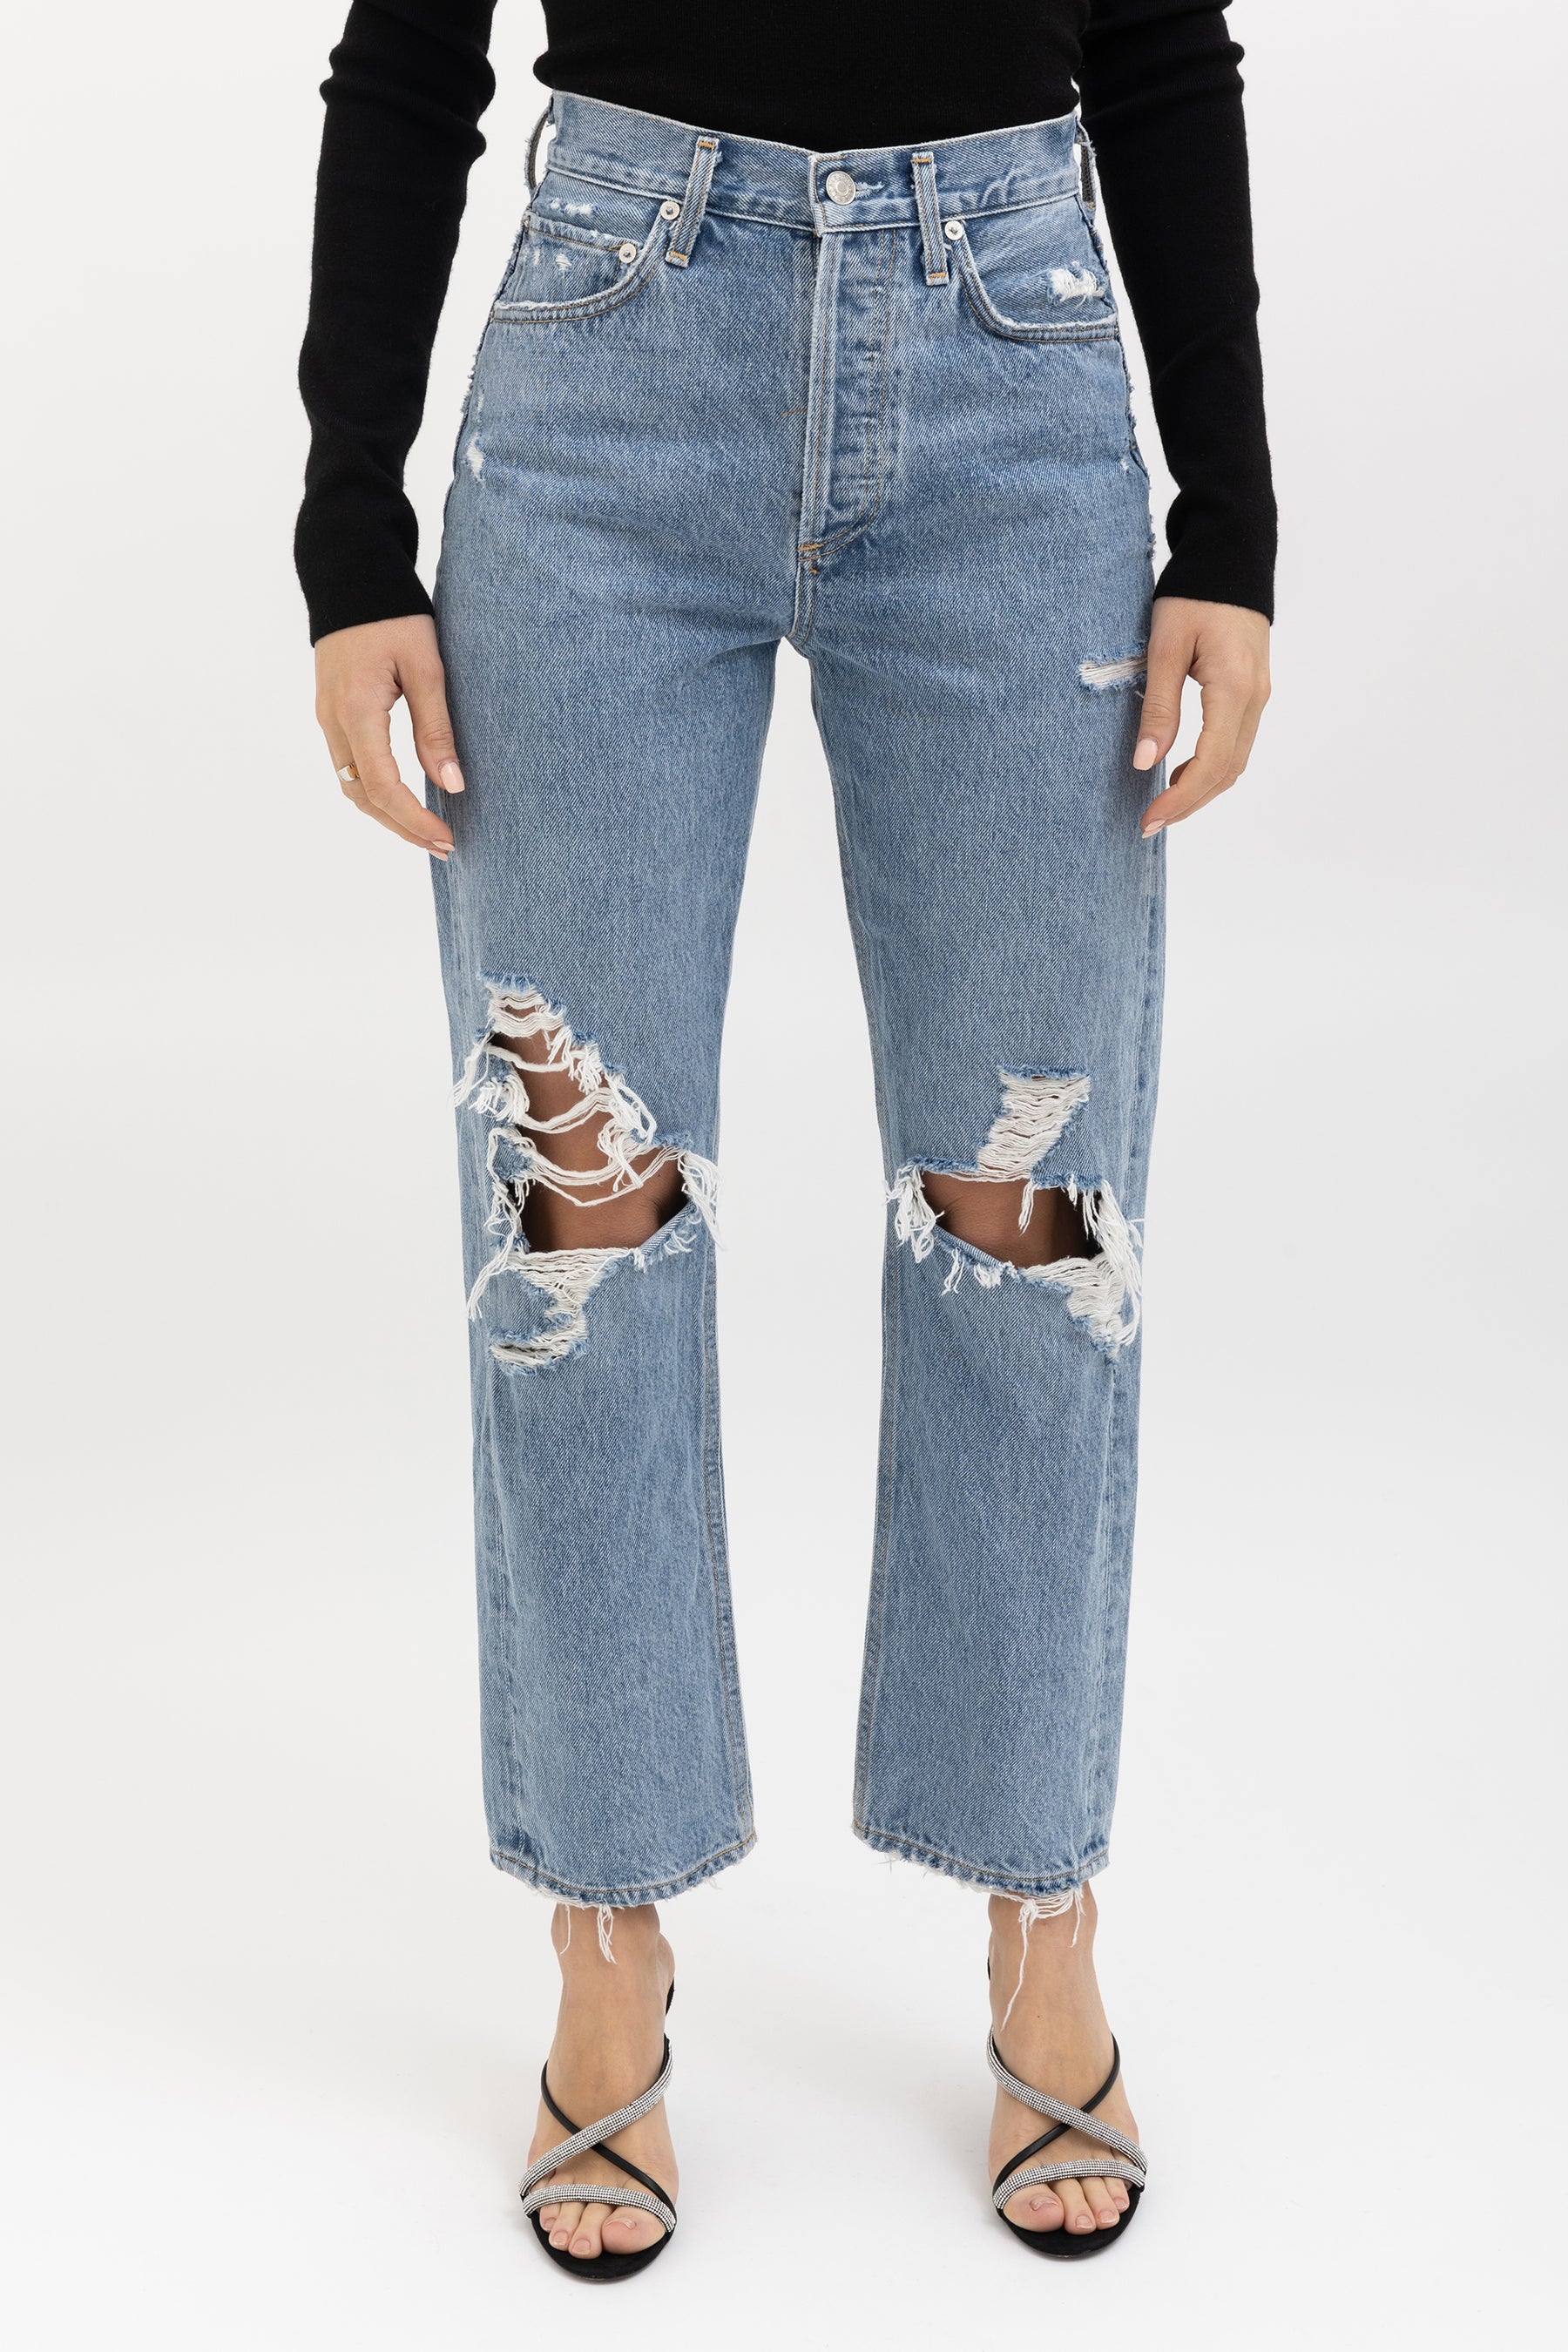 90's Distressed Mid Rise Jeans